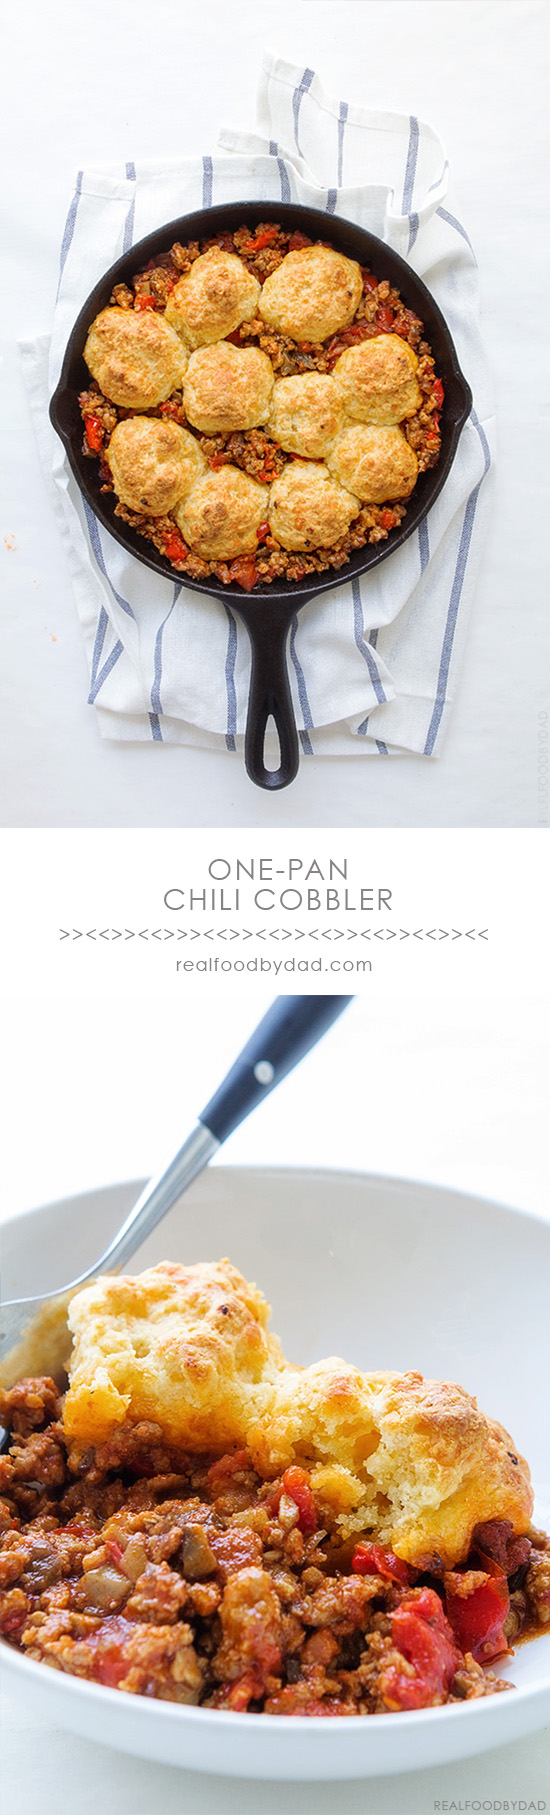 One Pan Chili Cobbler | Real Food by Dad copy